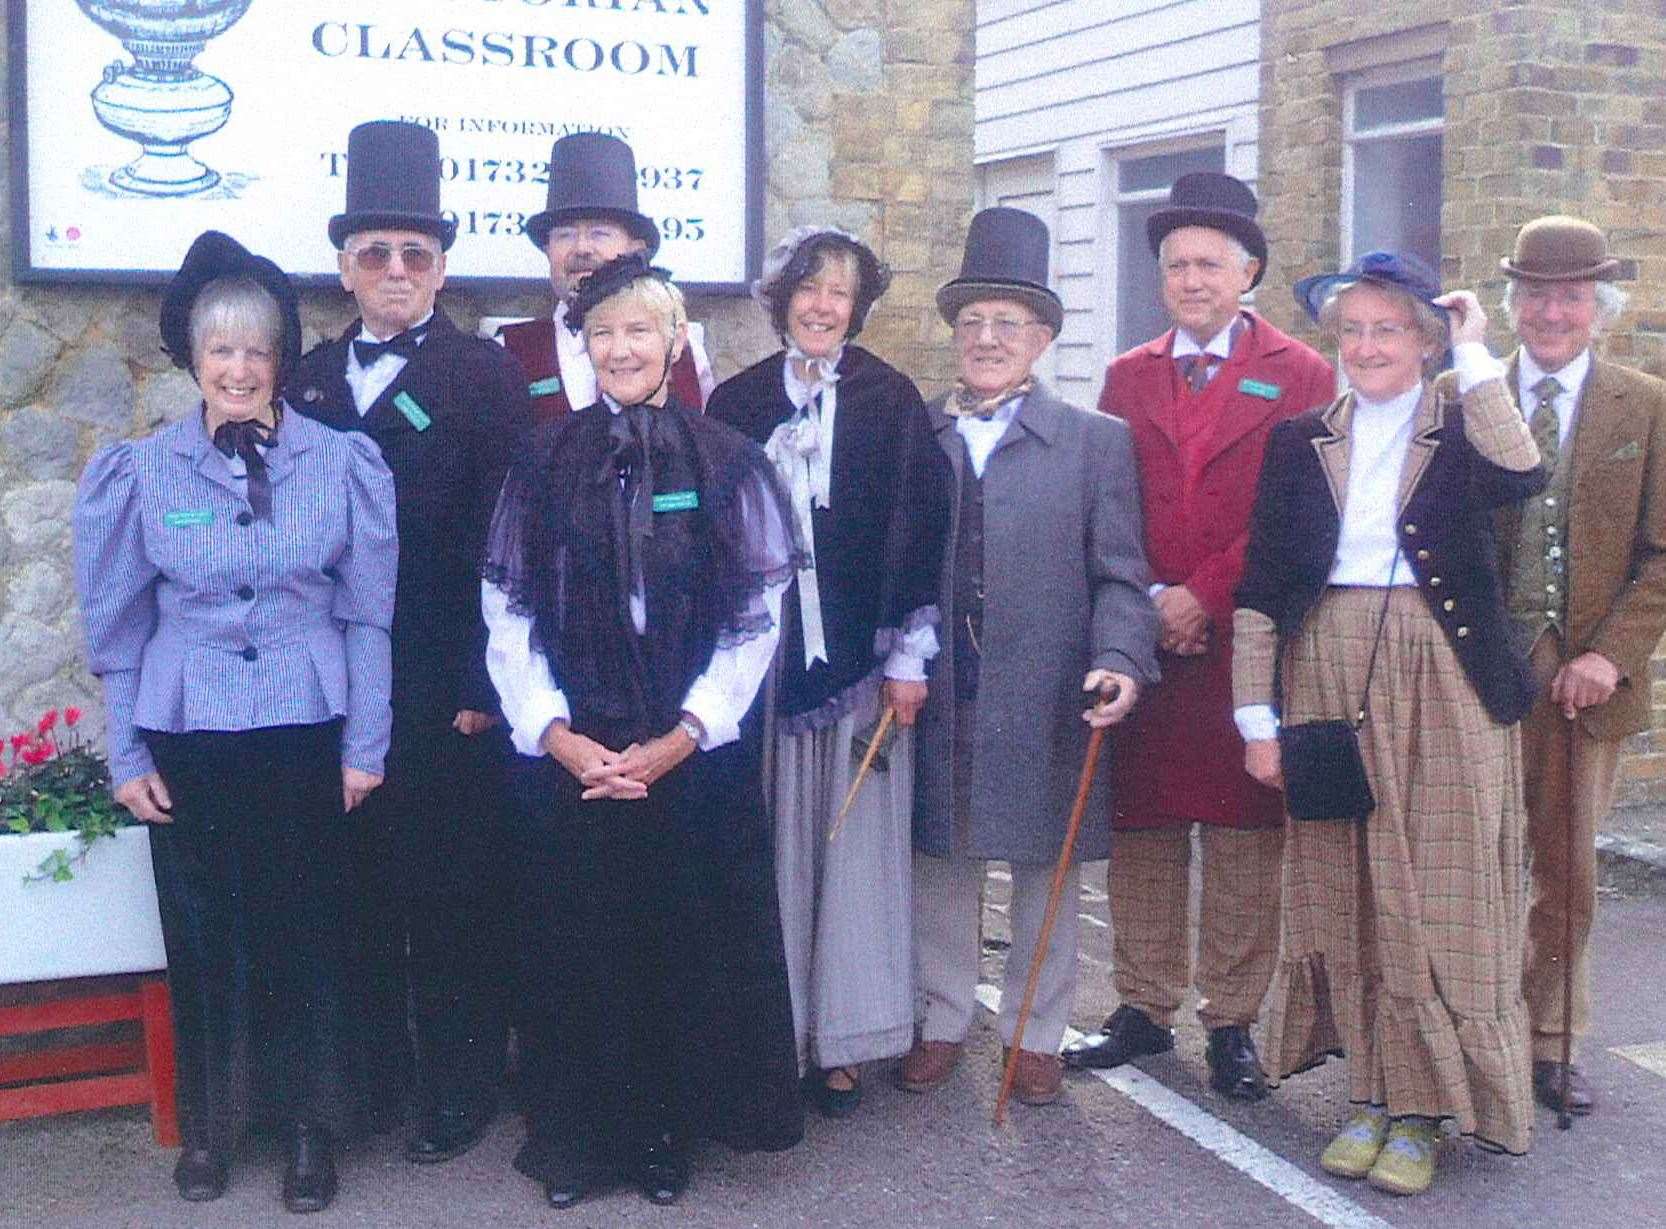 Some of the centre volunteers on opening day of the Ditton Heritage Centre in 2014